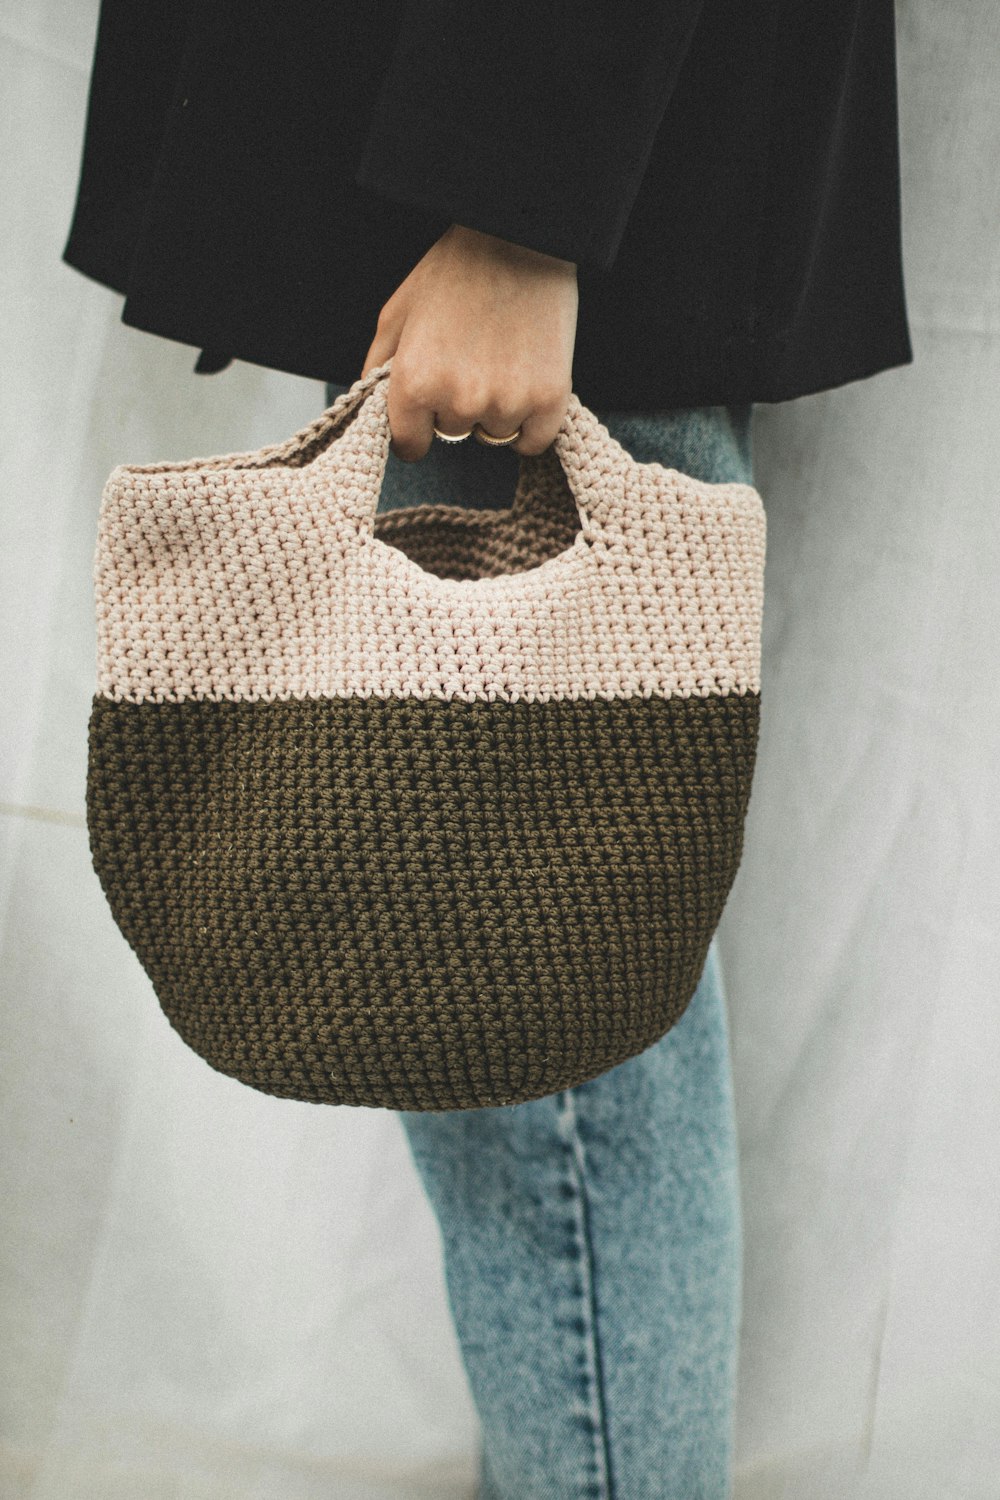 person holding brown and white tote bag